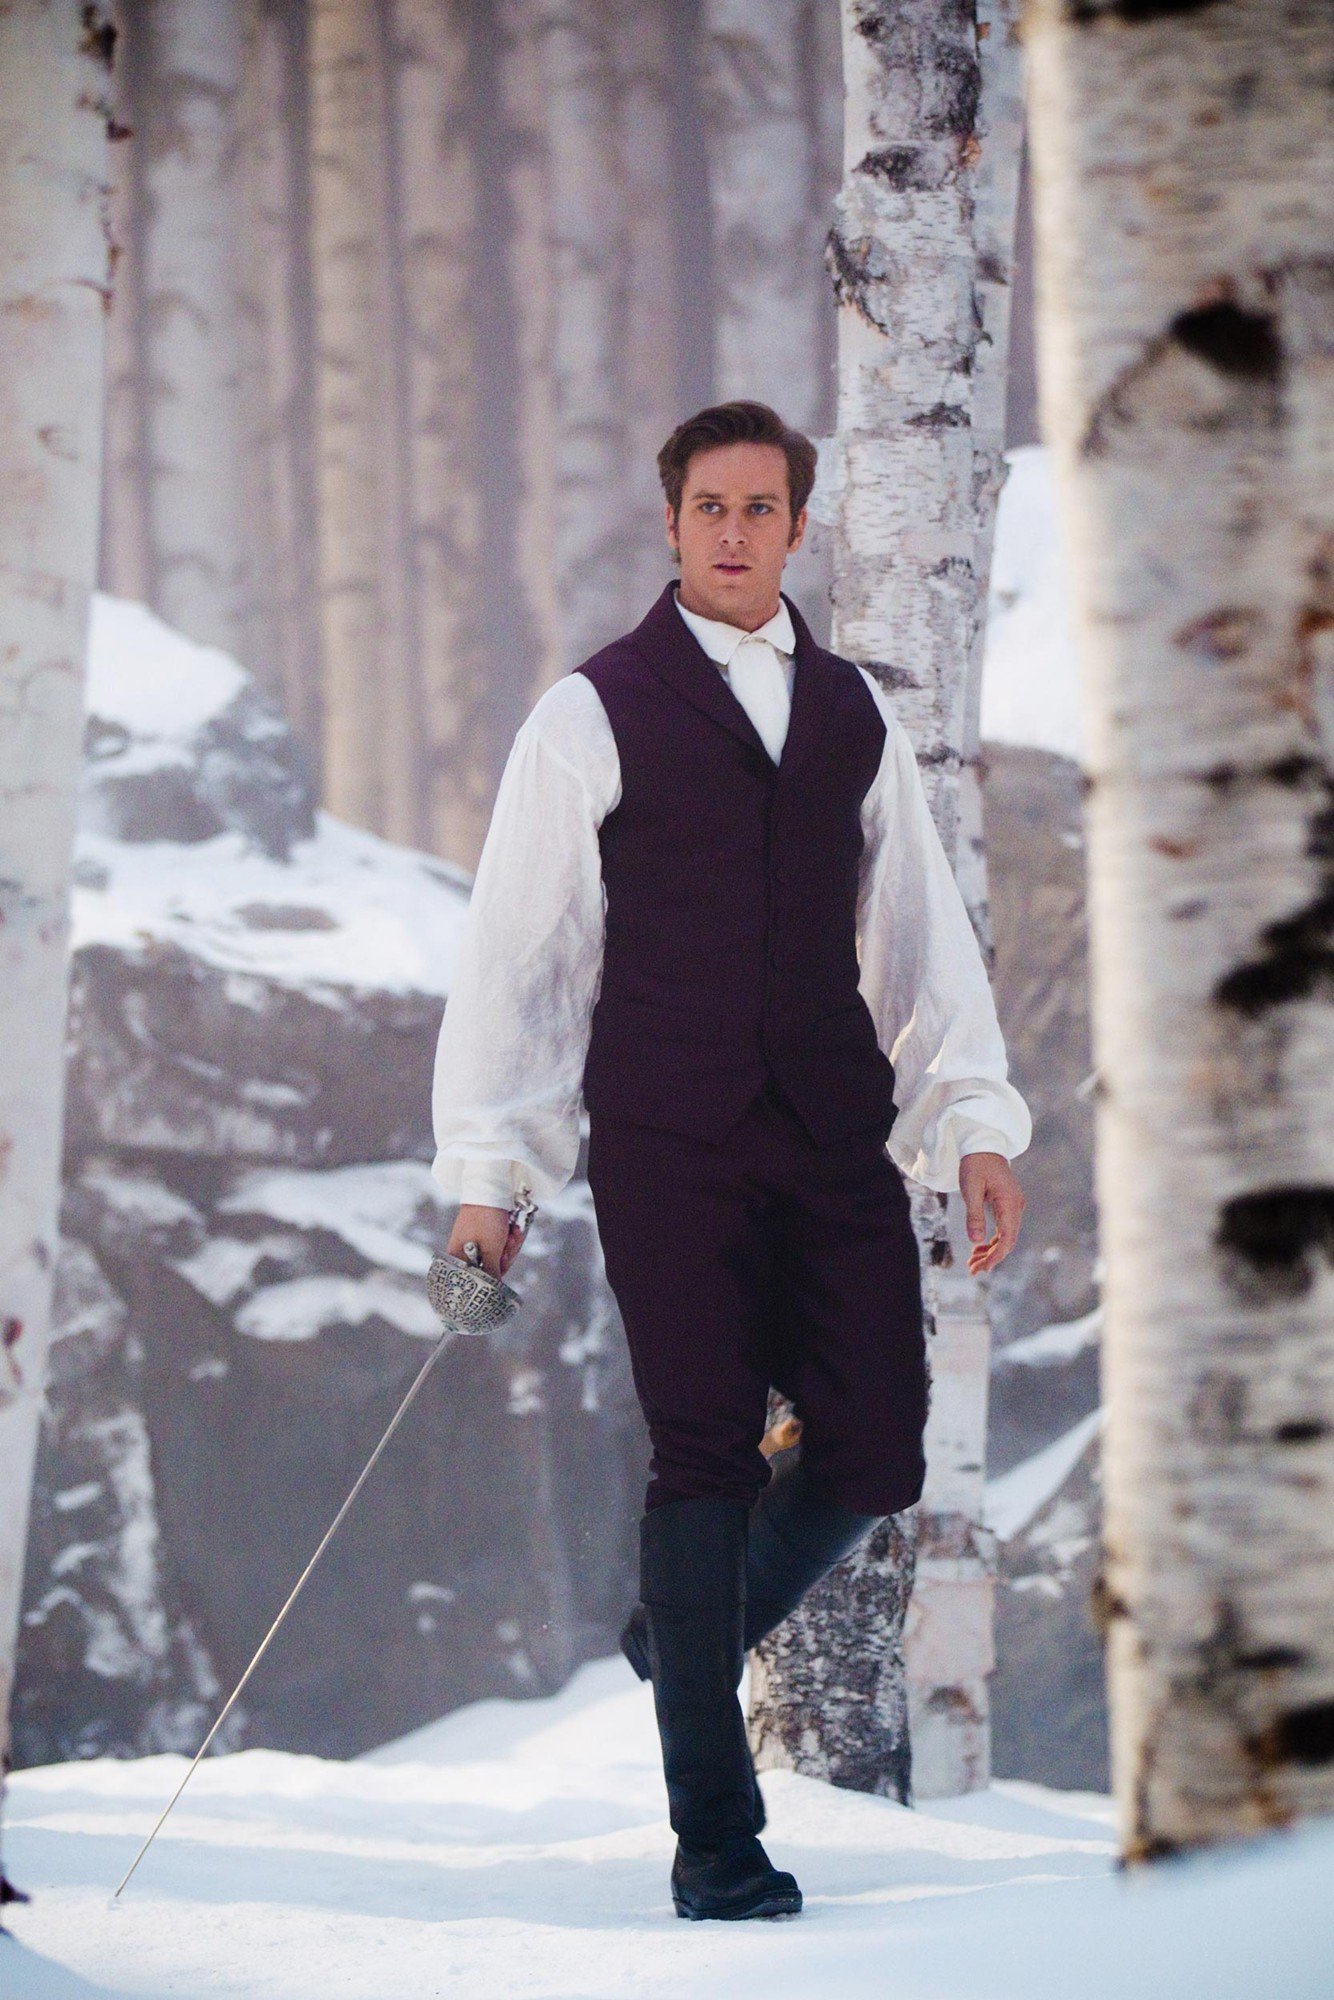 Armie Hammer stars as Prince Andrew Alcott in Relativity Media's Mirror Mirror (2012). Photo credit by Jan Thijs.